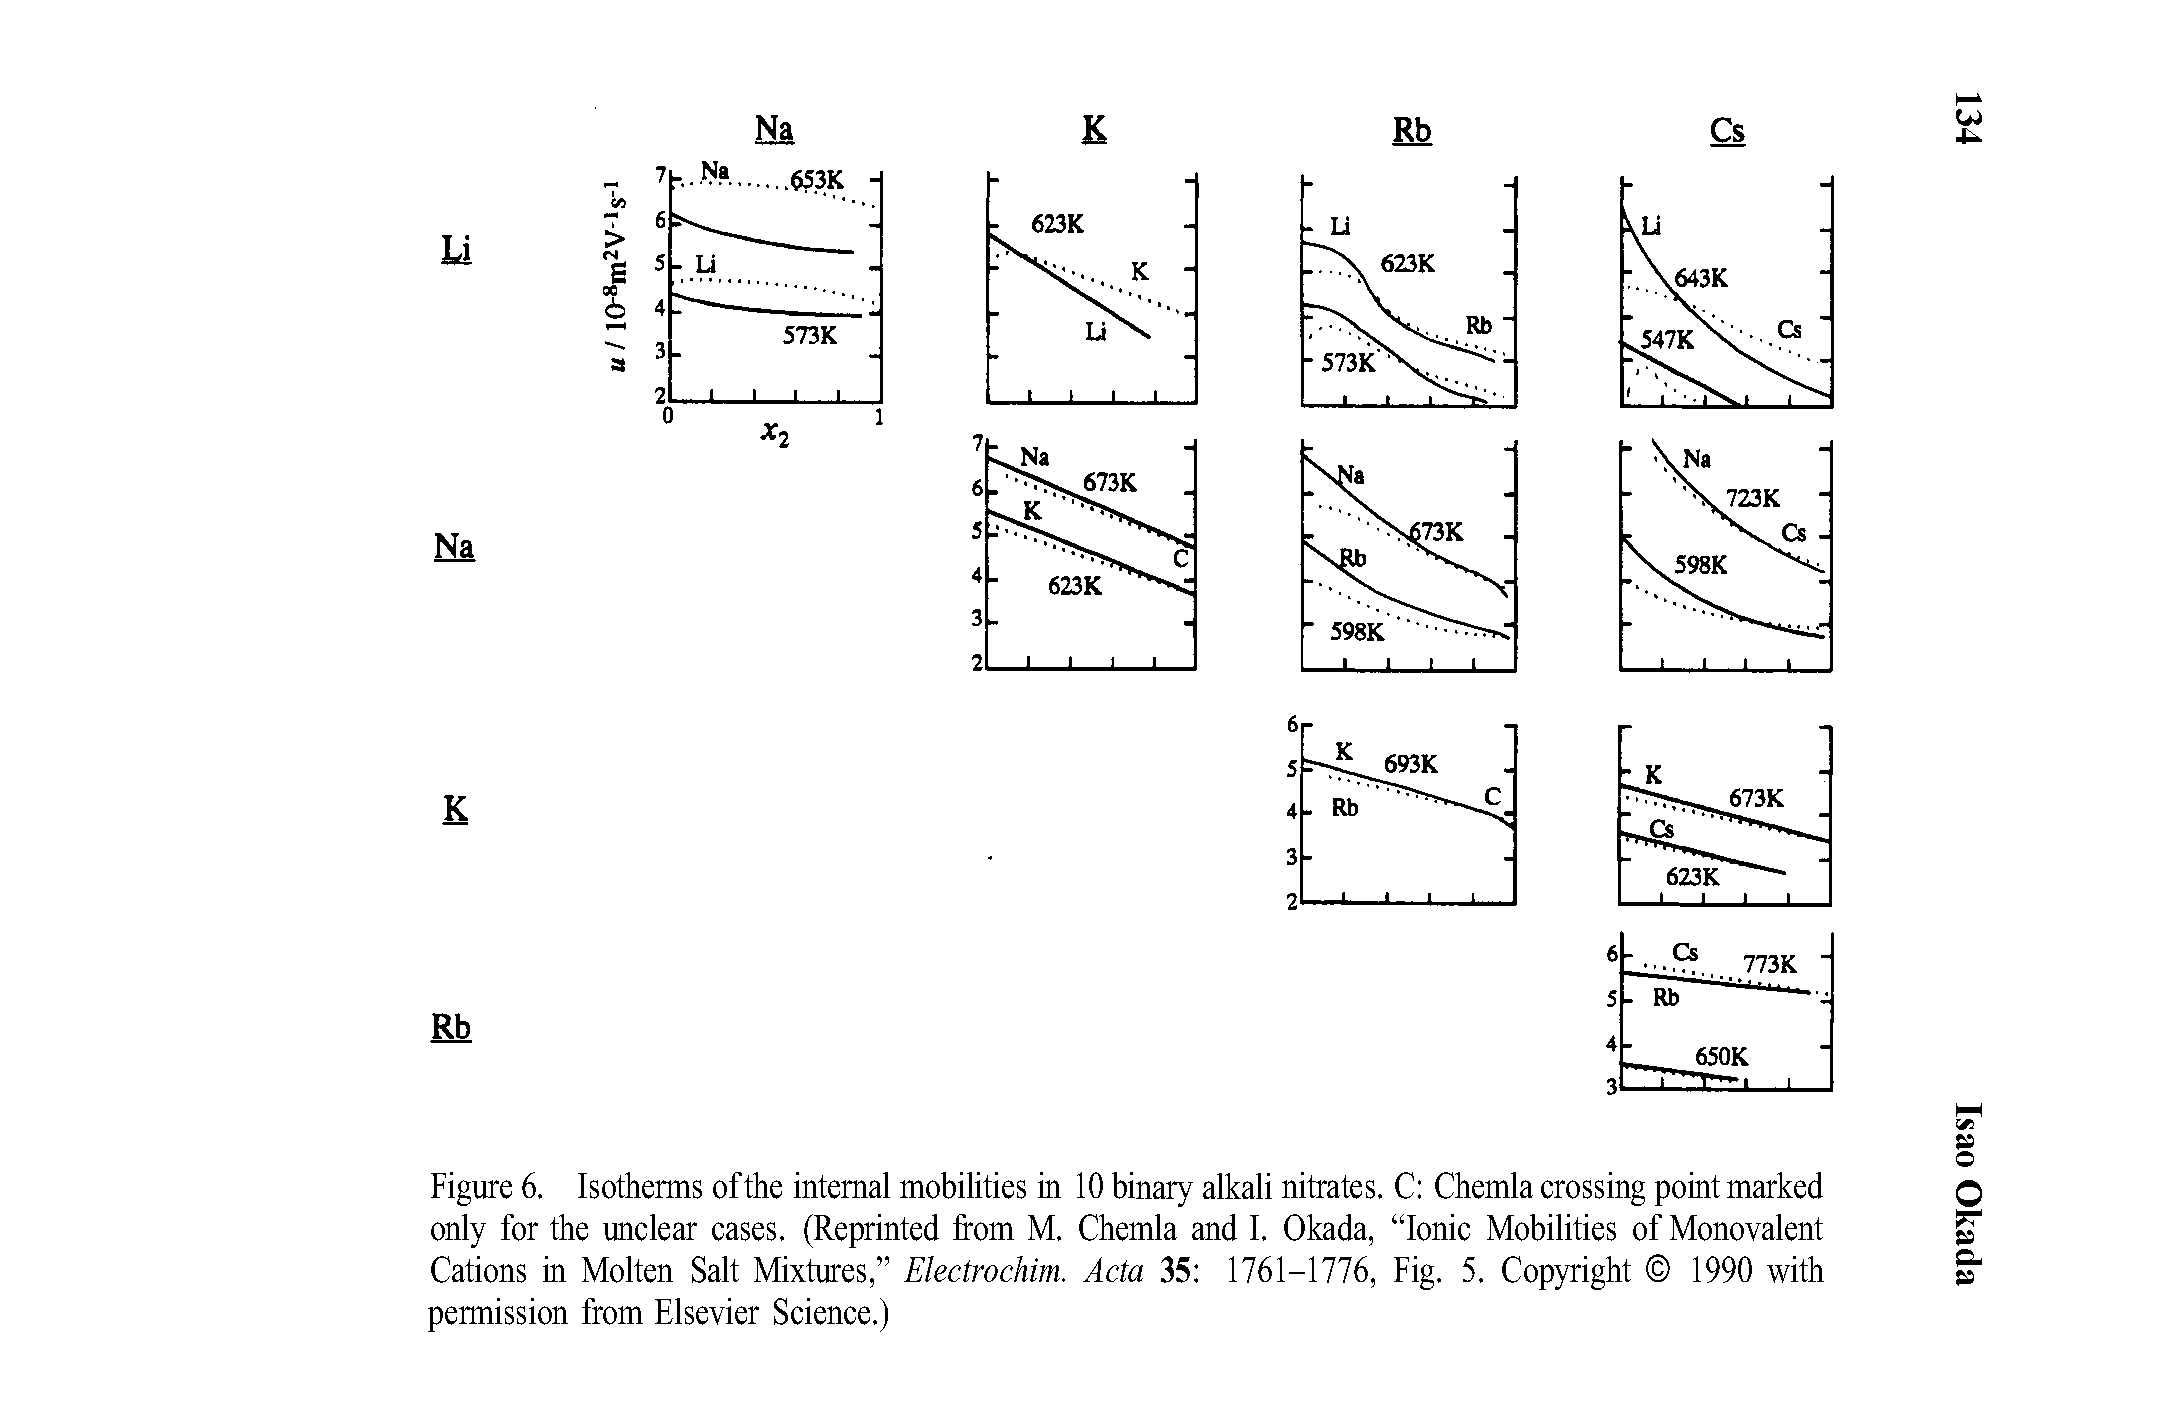 Figure 6. Isotherms of the internal mobilities in 10 binary alkali nitrates. C Chemla erossing point marked only for the unelear eases. (Reprinted from M. Chemla and I. Okada, lonie Mobilities of Monovalent Cations in Molten Salt Mixtures, Electrochim. Acta 35 1761-1776, Fig. 5. Copyright 1990 with permission from Elsevier Seienee.)...